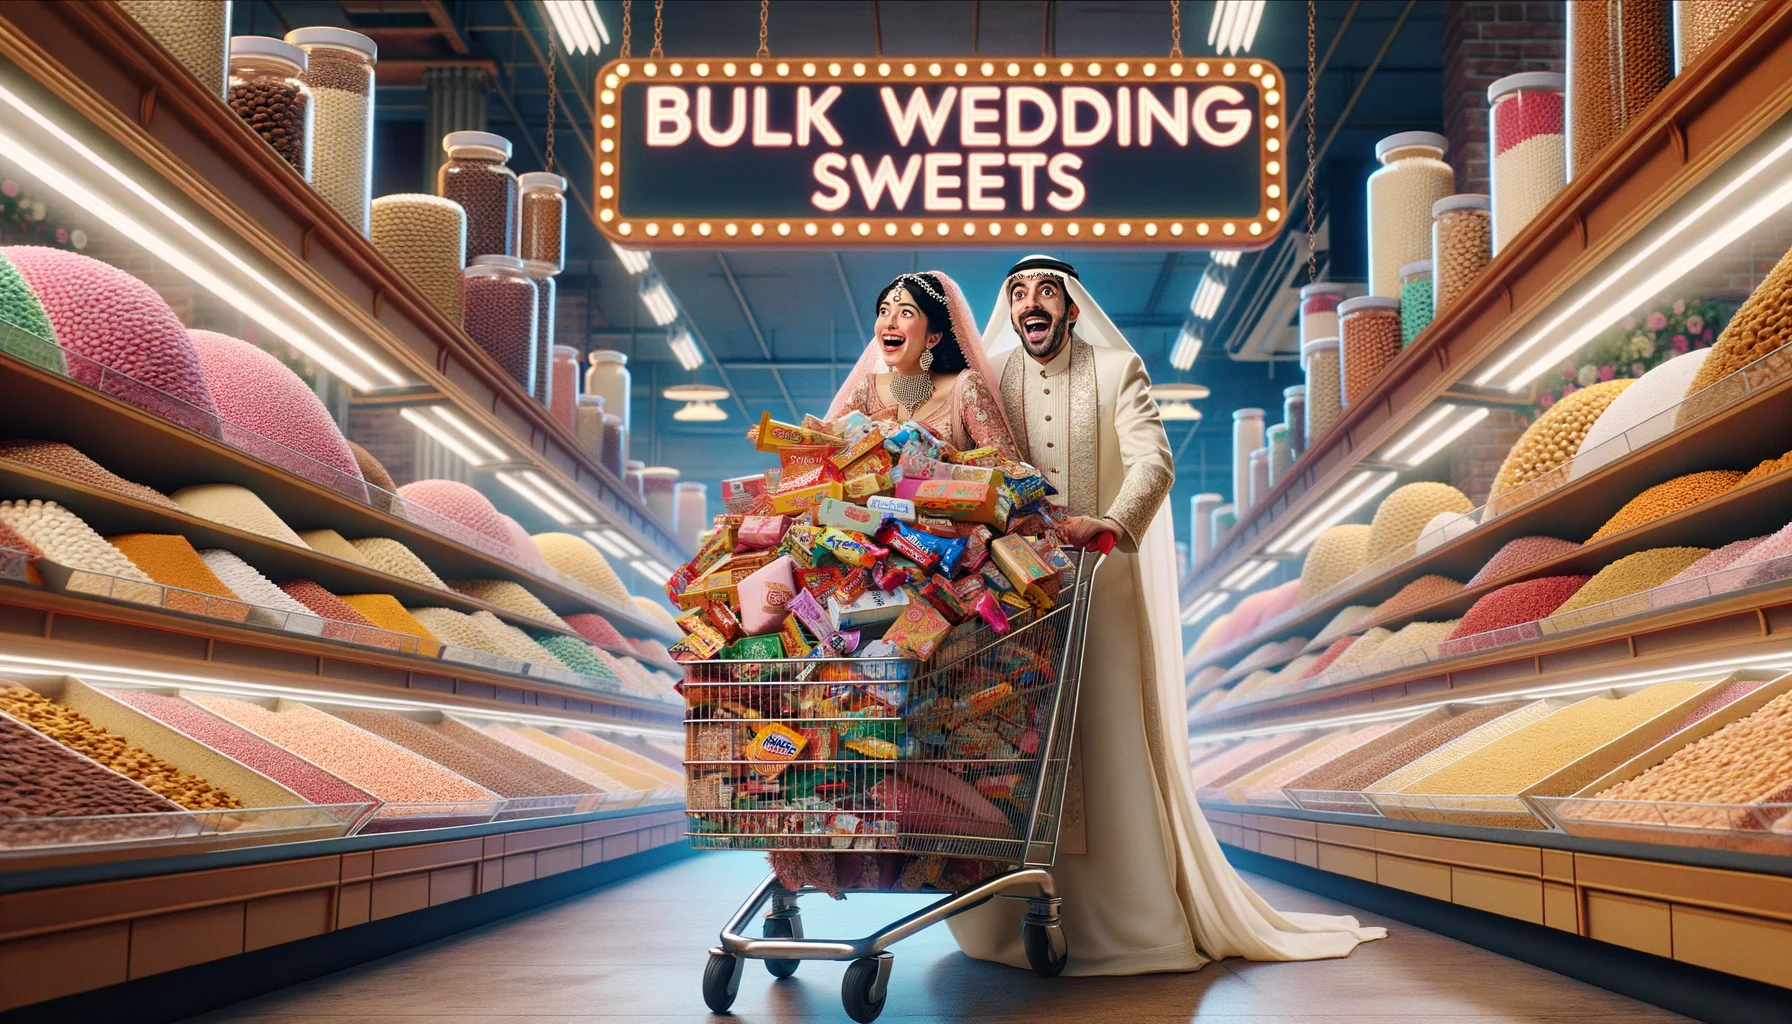 Imagine a light-hearted and humorous scenario that embodies the idea of purchasing bulk wedding sweets. In this scene, a Middle-Eastern groom and an Asian bride, both dressed in traditional wedding outfits, are pushing a large shopping cart overflowing with all sorts of traditional wedding sweets. They are at a sweets mega store whose interior is filled with shelves upon shelves of various kinds of sweets from around the world. Their faces show excitement and anticipation as they figure out the logistics of how to transport their massive haul. Balancing above the heap of sweets is a neon sign saying 'Bulk Wedding Sweets', glowing jubilantly against the busy backdrop.